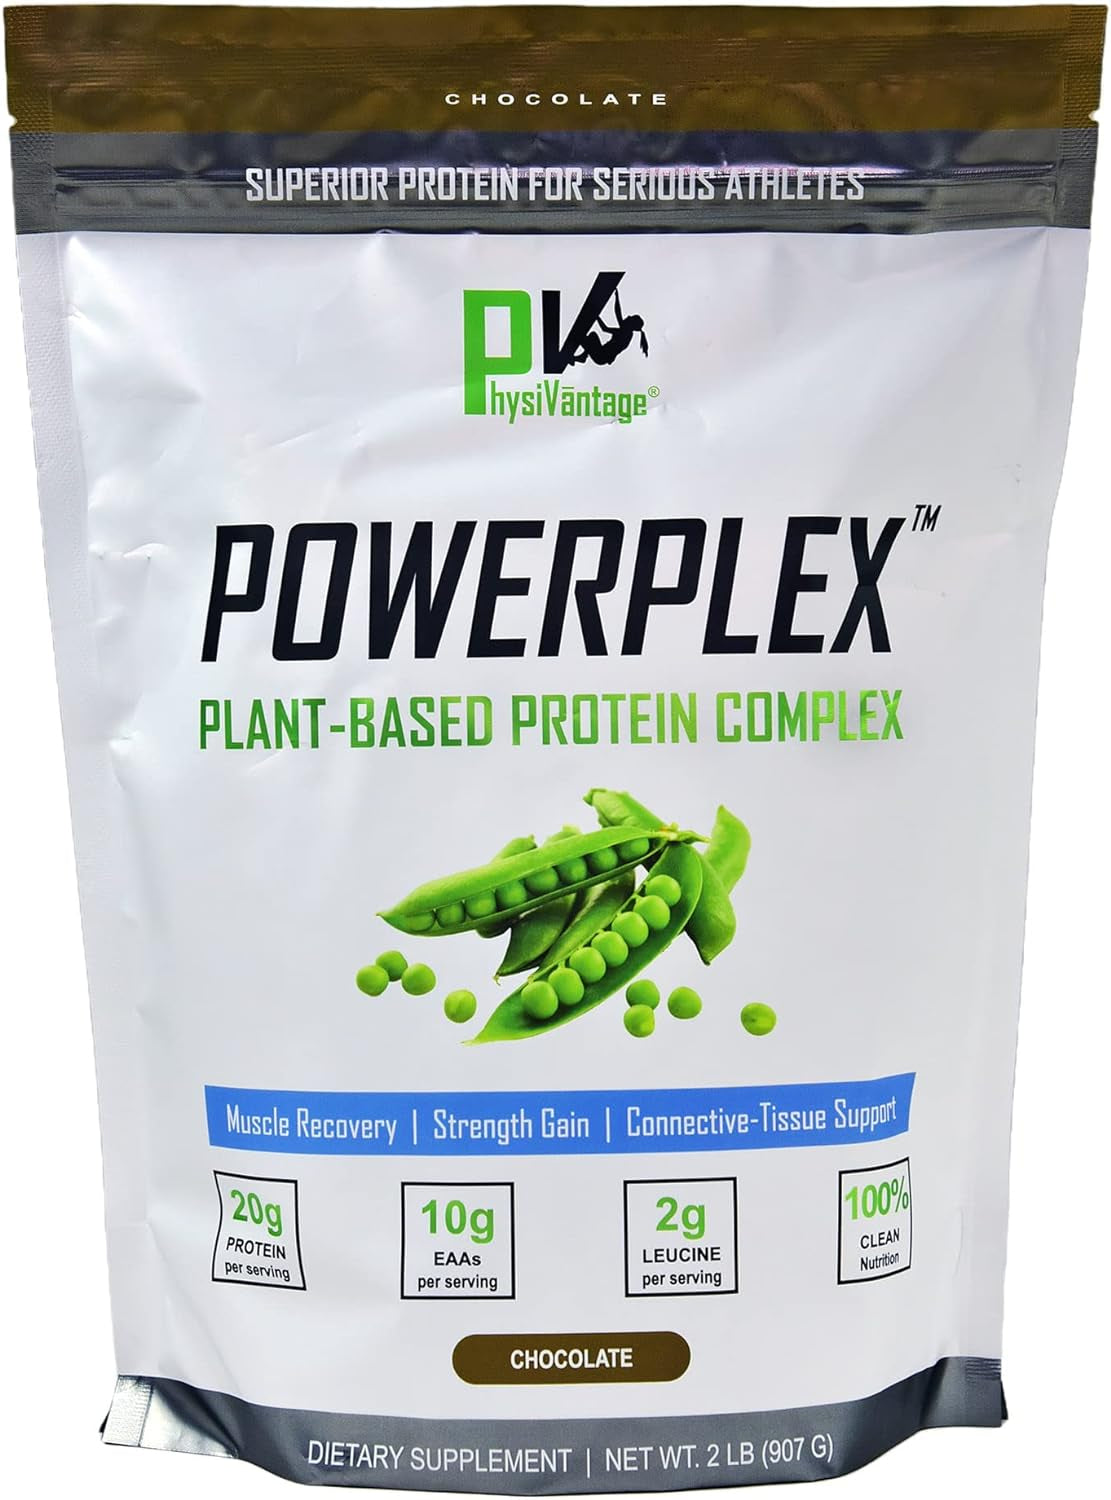 POWERPLEX Vegan Protein Powder + Collagen Alternative Organic Pea & Rice Protein Complex W/Monk Fruit Sweetener - Supports Muscles, Tendons, and Ligaments | 2.0 Lb Bag (Chocolate)